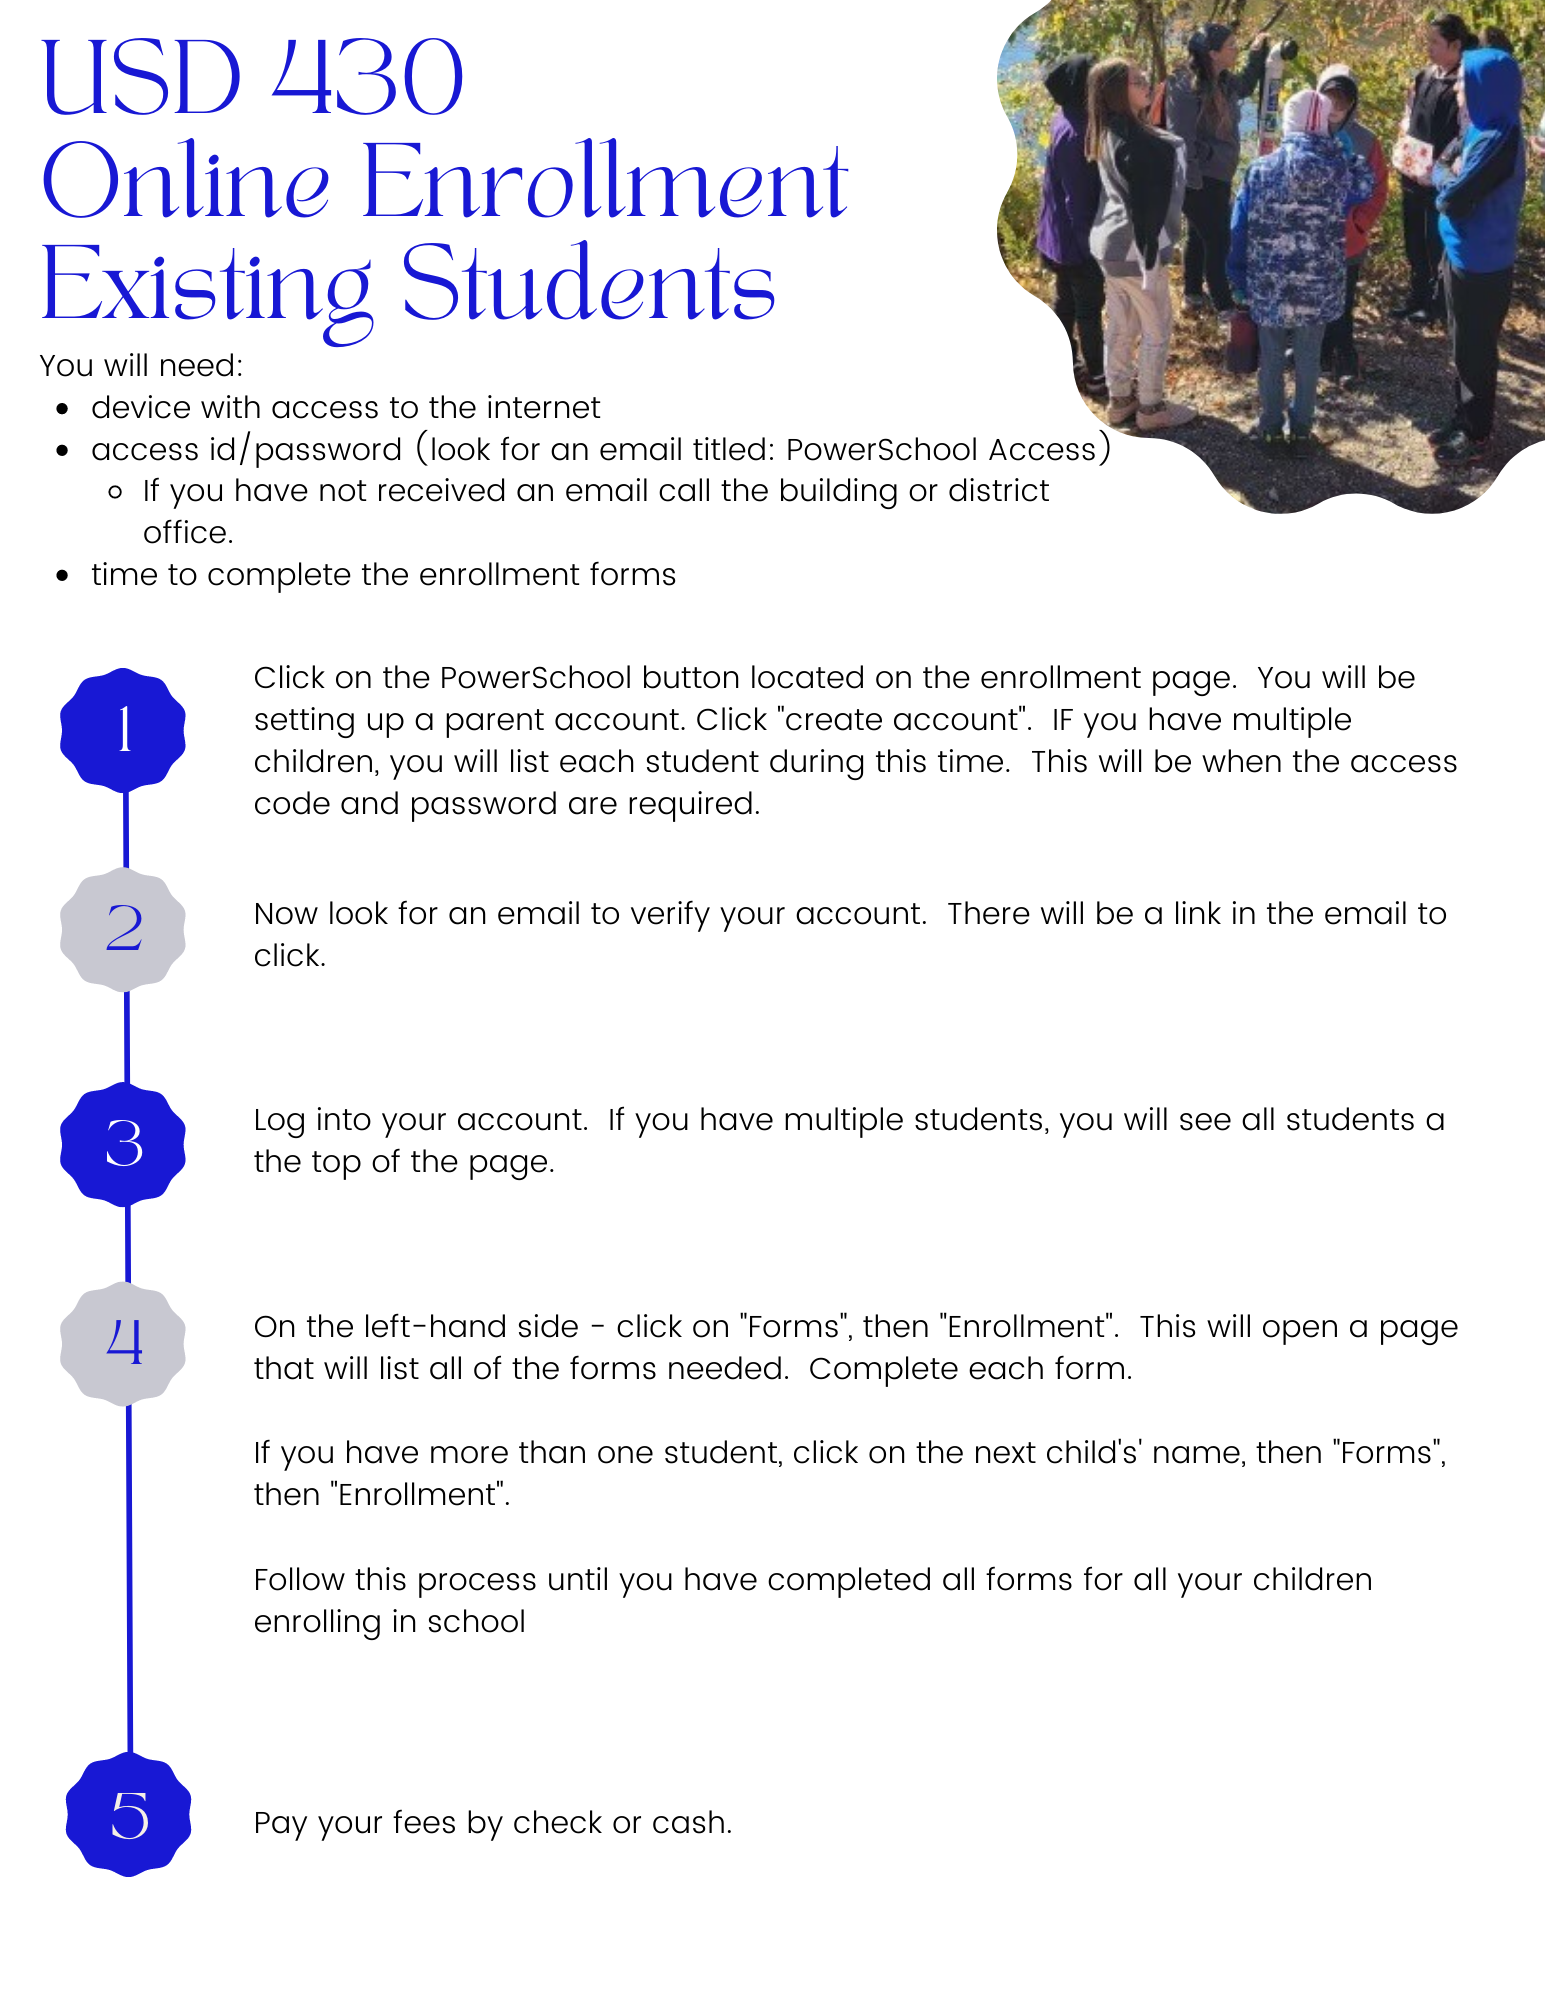 Existing Students